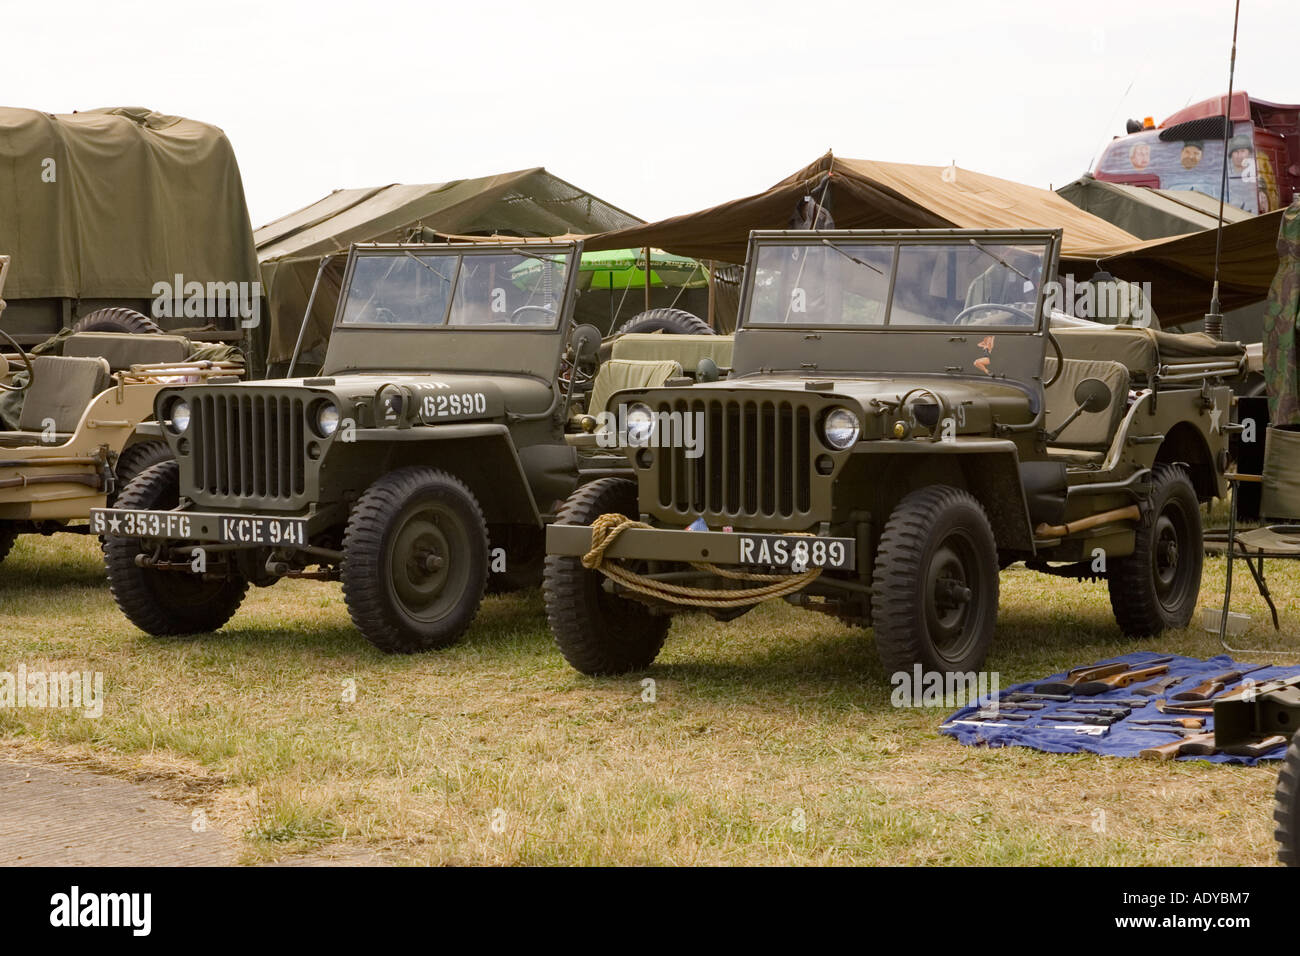 two WWII Jeep vehicles on display at Rougham fair in Suffolk 2006, UK Stock Photo